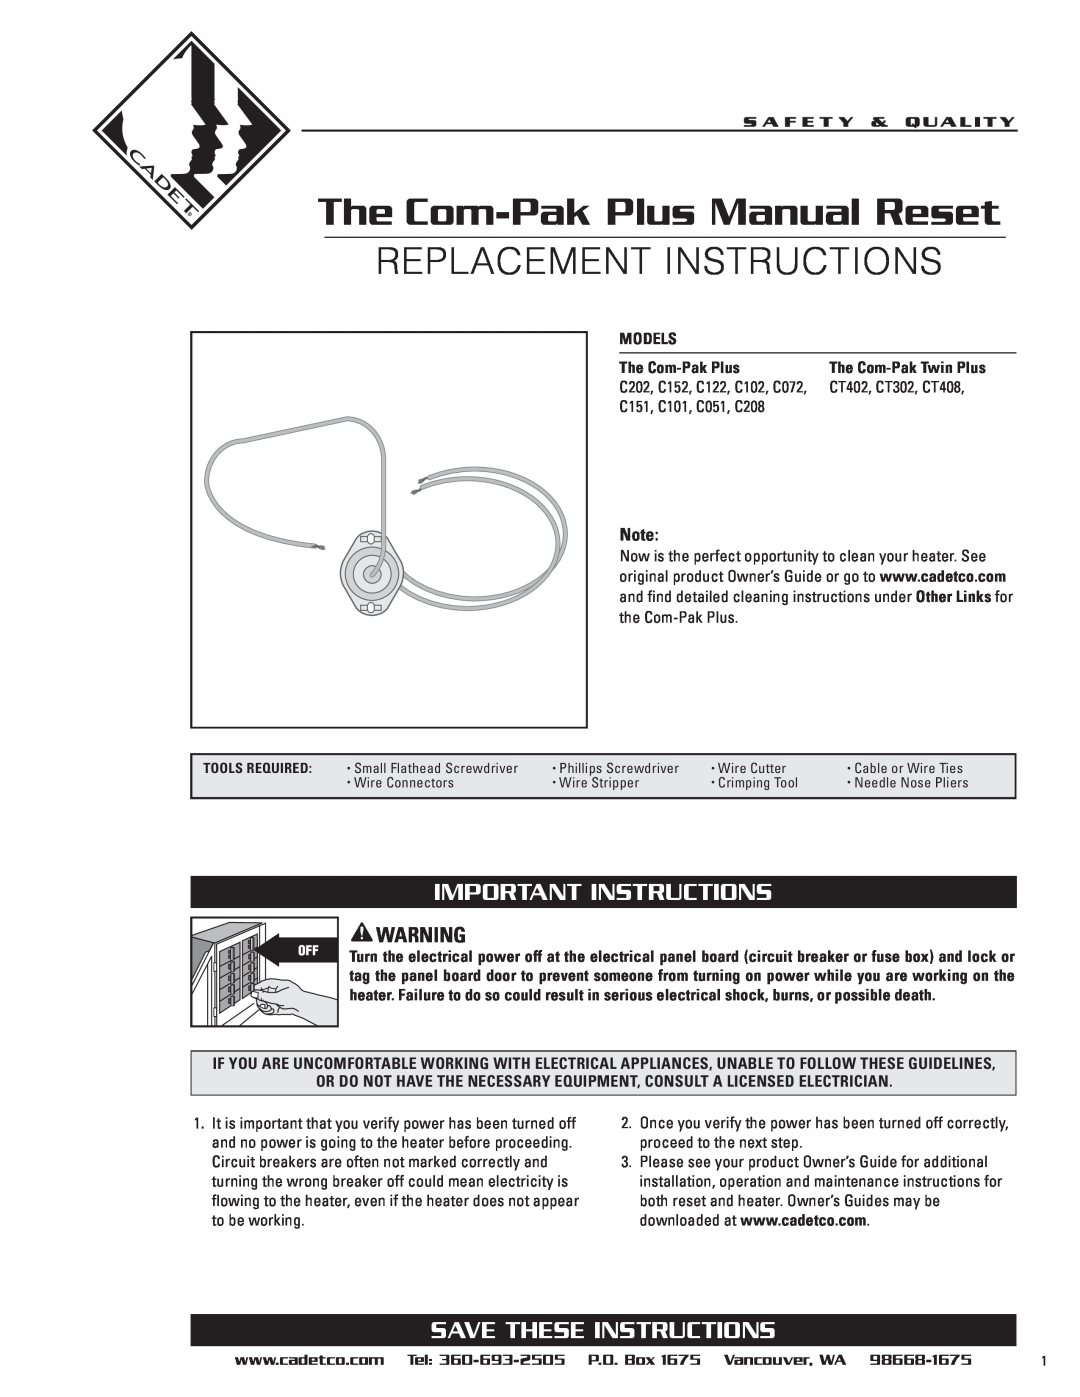 Cadet CT302, CT408, CT402 manual Important Instructions, Save These Instructions, Models, The Com-PakPlus Manual Reset 